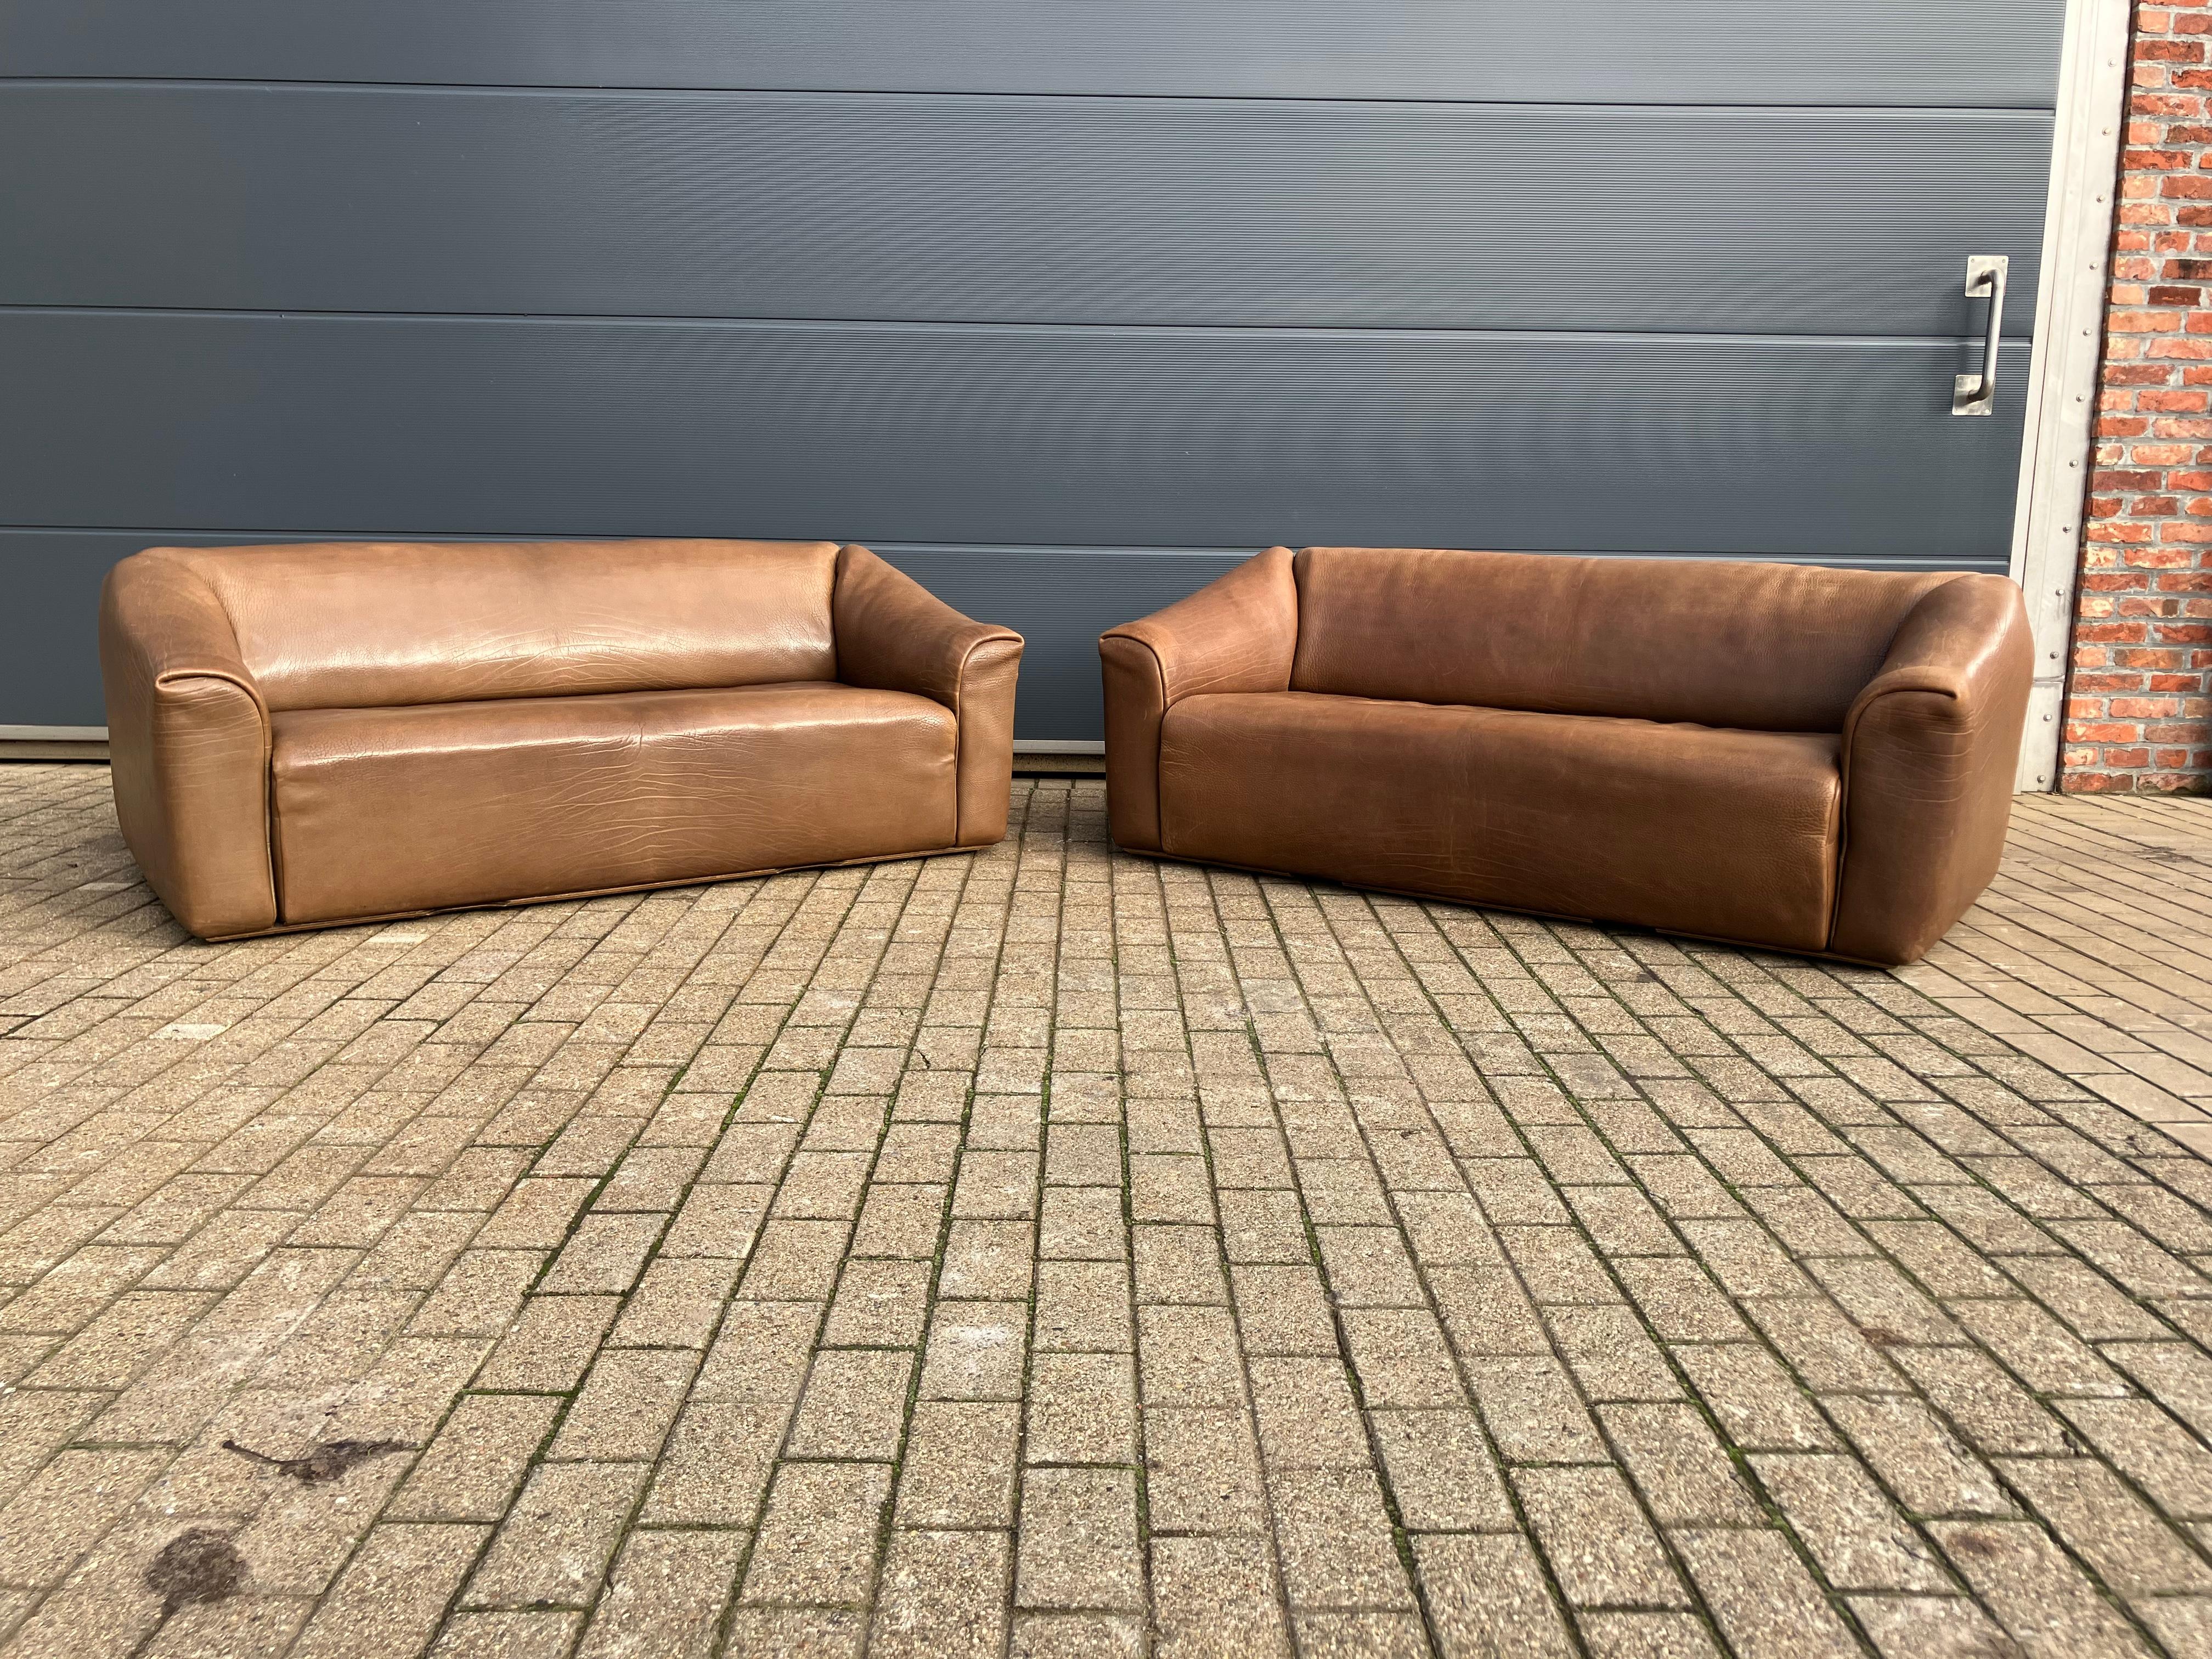 Design classic from the Swiss top brand De Sede. Made of the typical indestructible 5mm thick NECK leather (Nappa natural leather). Top quality!

Color: Light brown, Cognac

Both couches are in top condition without dark discoloration! Were always